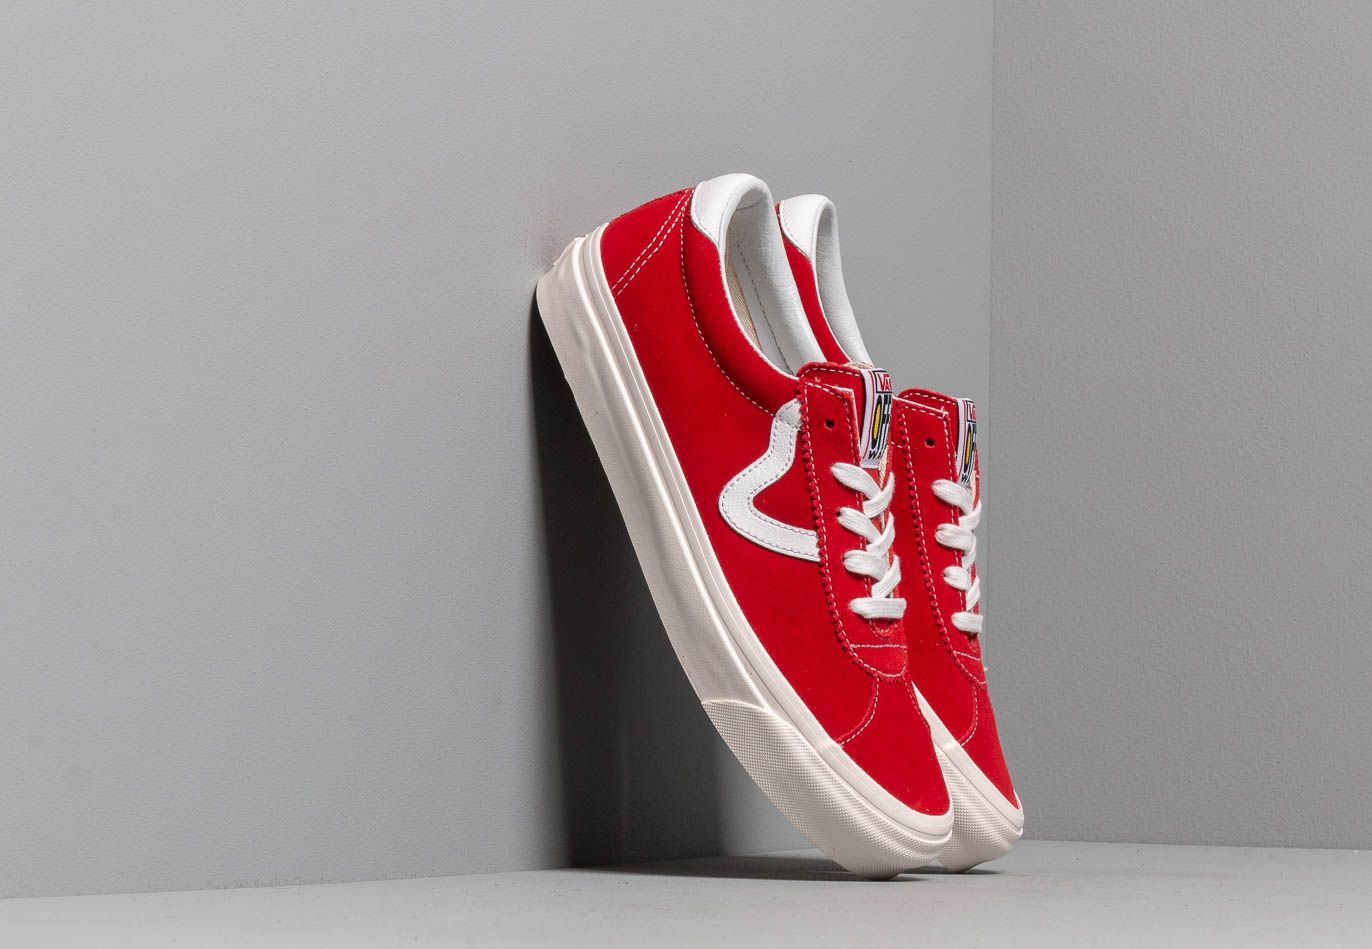 Vans Style 73 DX (Anaheim Factory) Og Red/ White VN0A3WLQVTM1